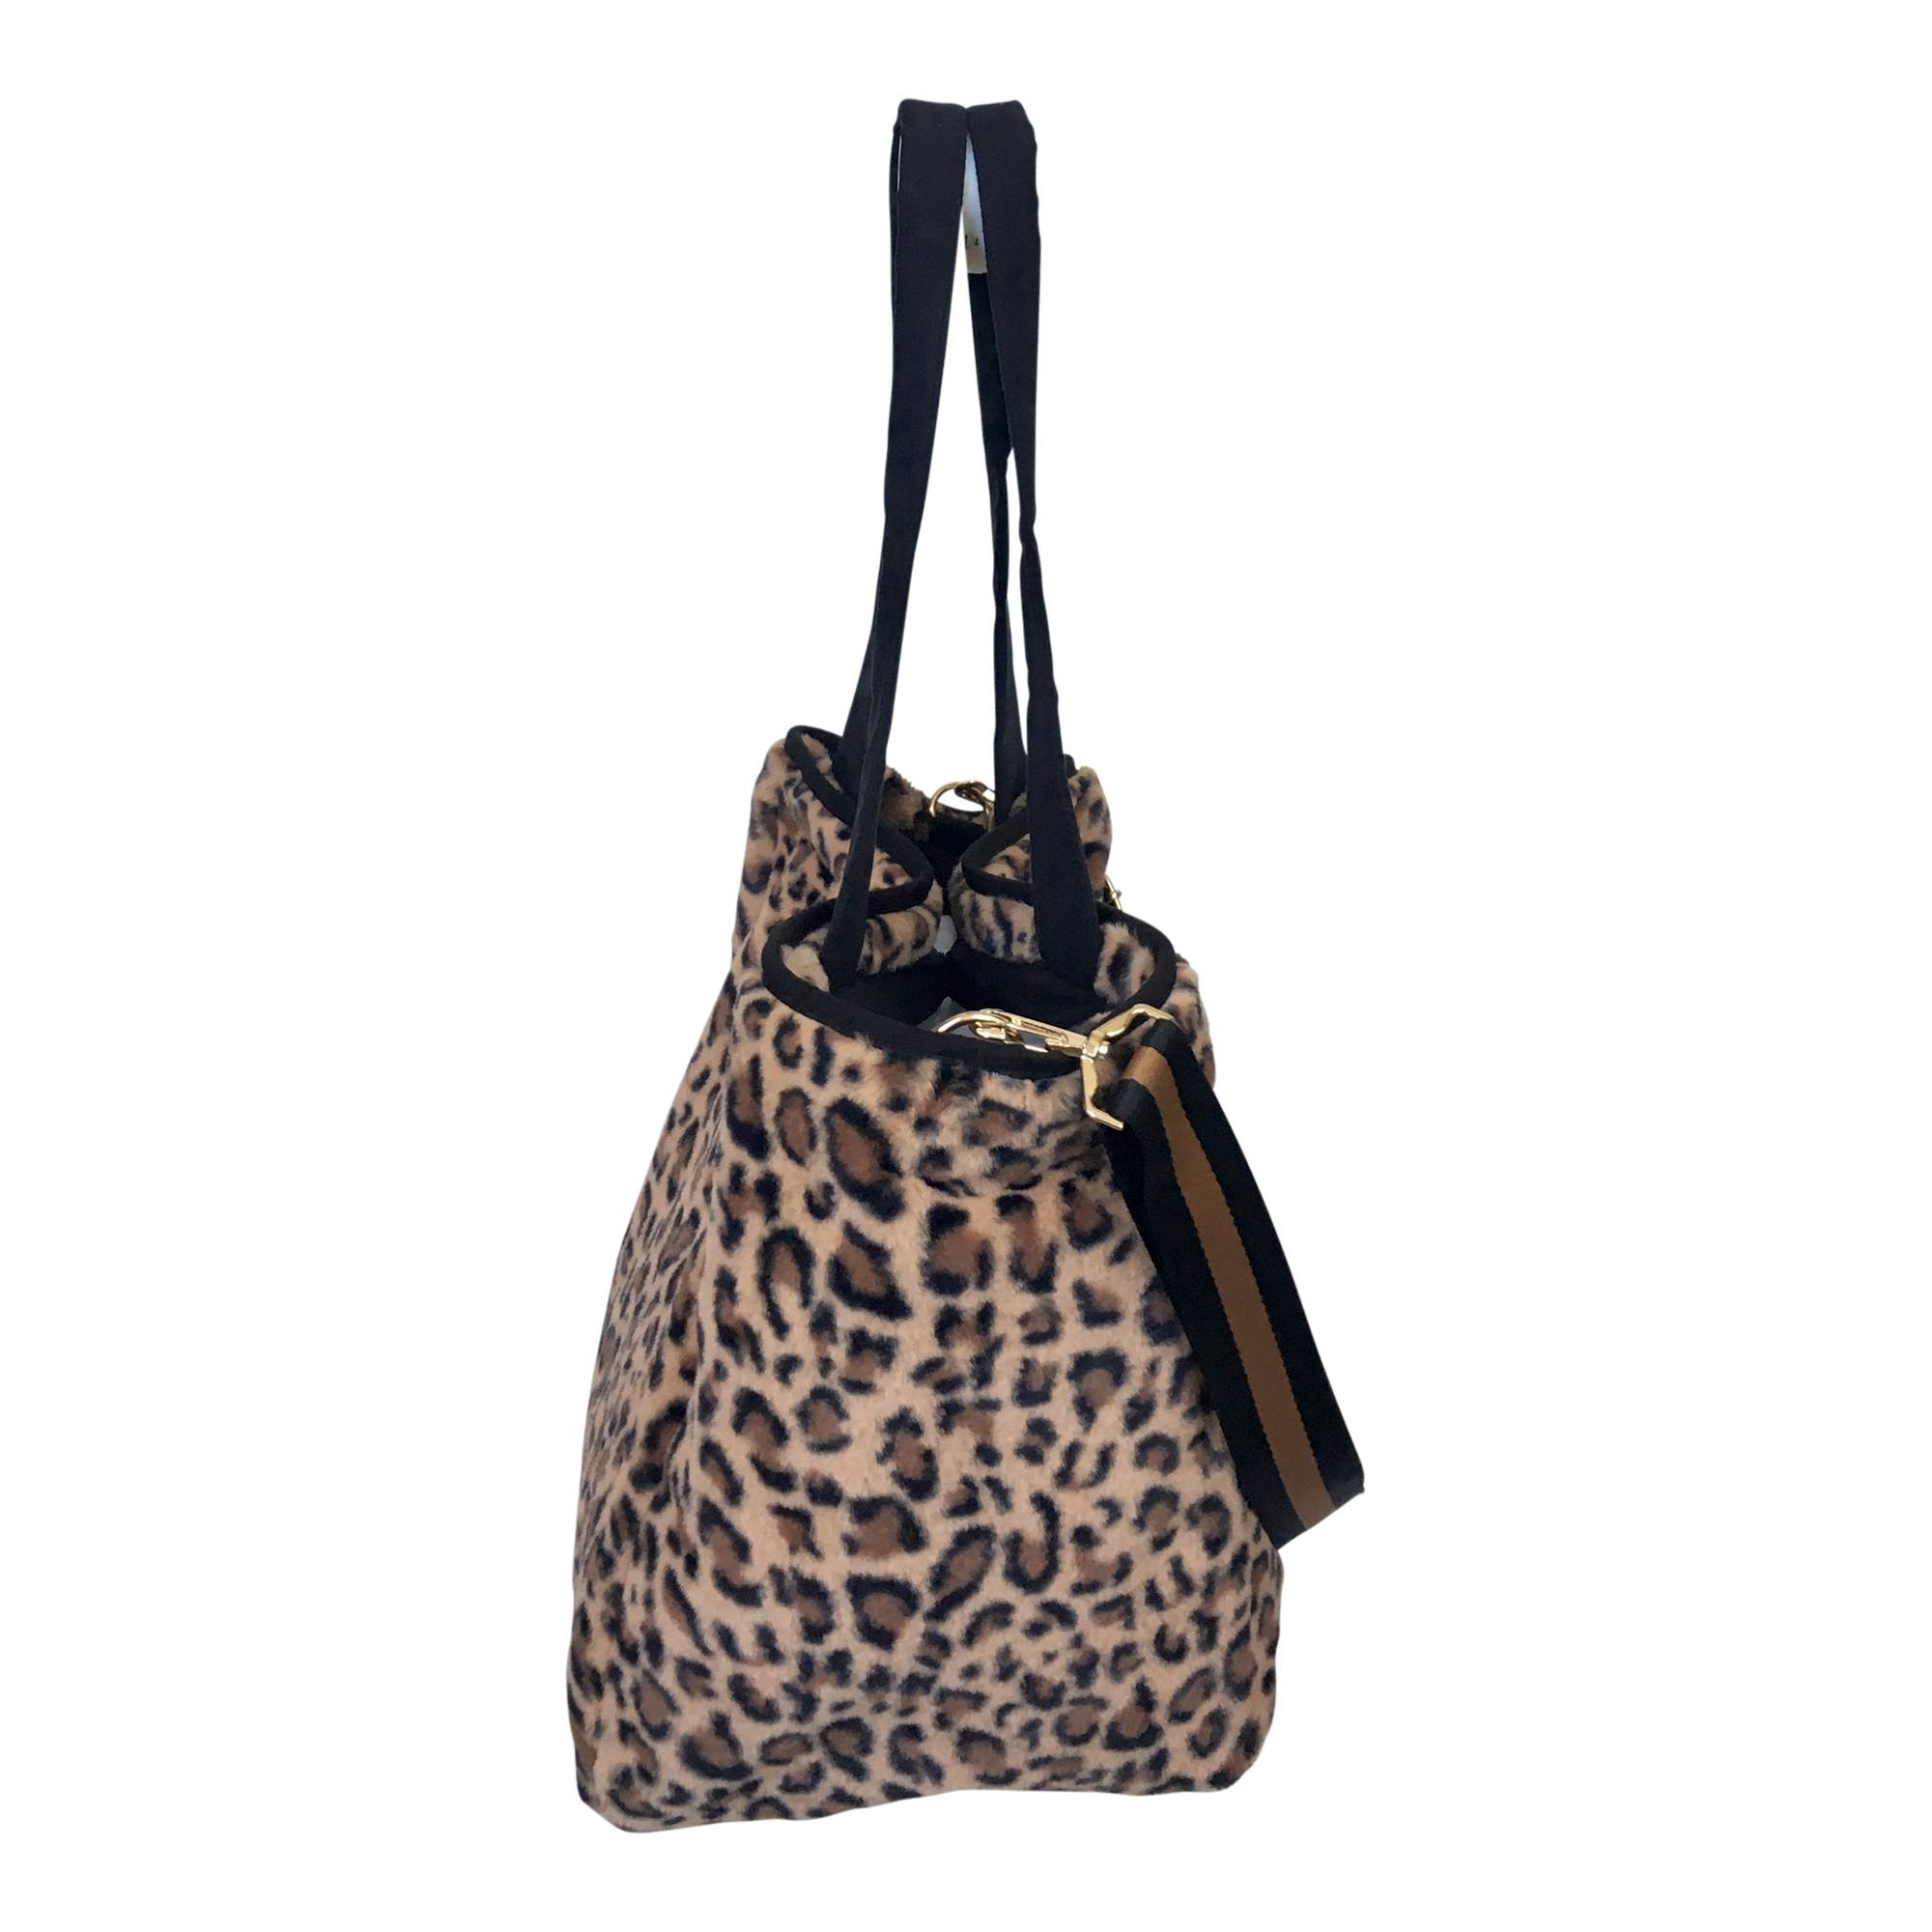 Cow print tote bag with removable strap